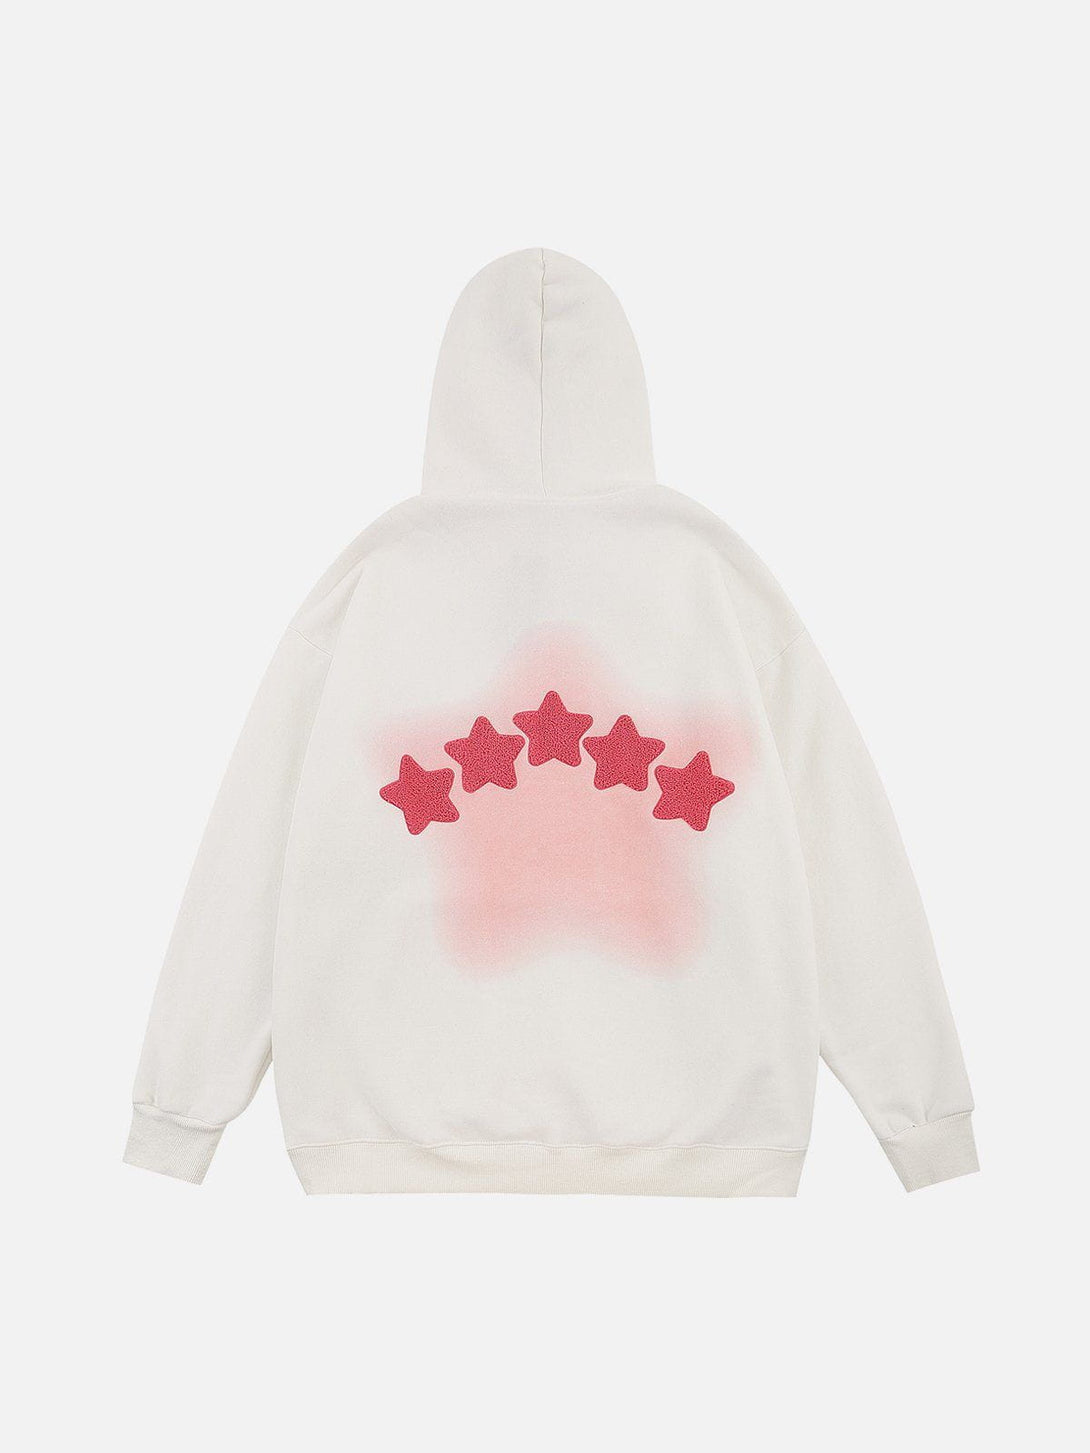 Majesda® - Flocked Star Embroidery Hoodie outfit ideas streetwear fashion